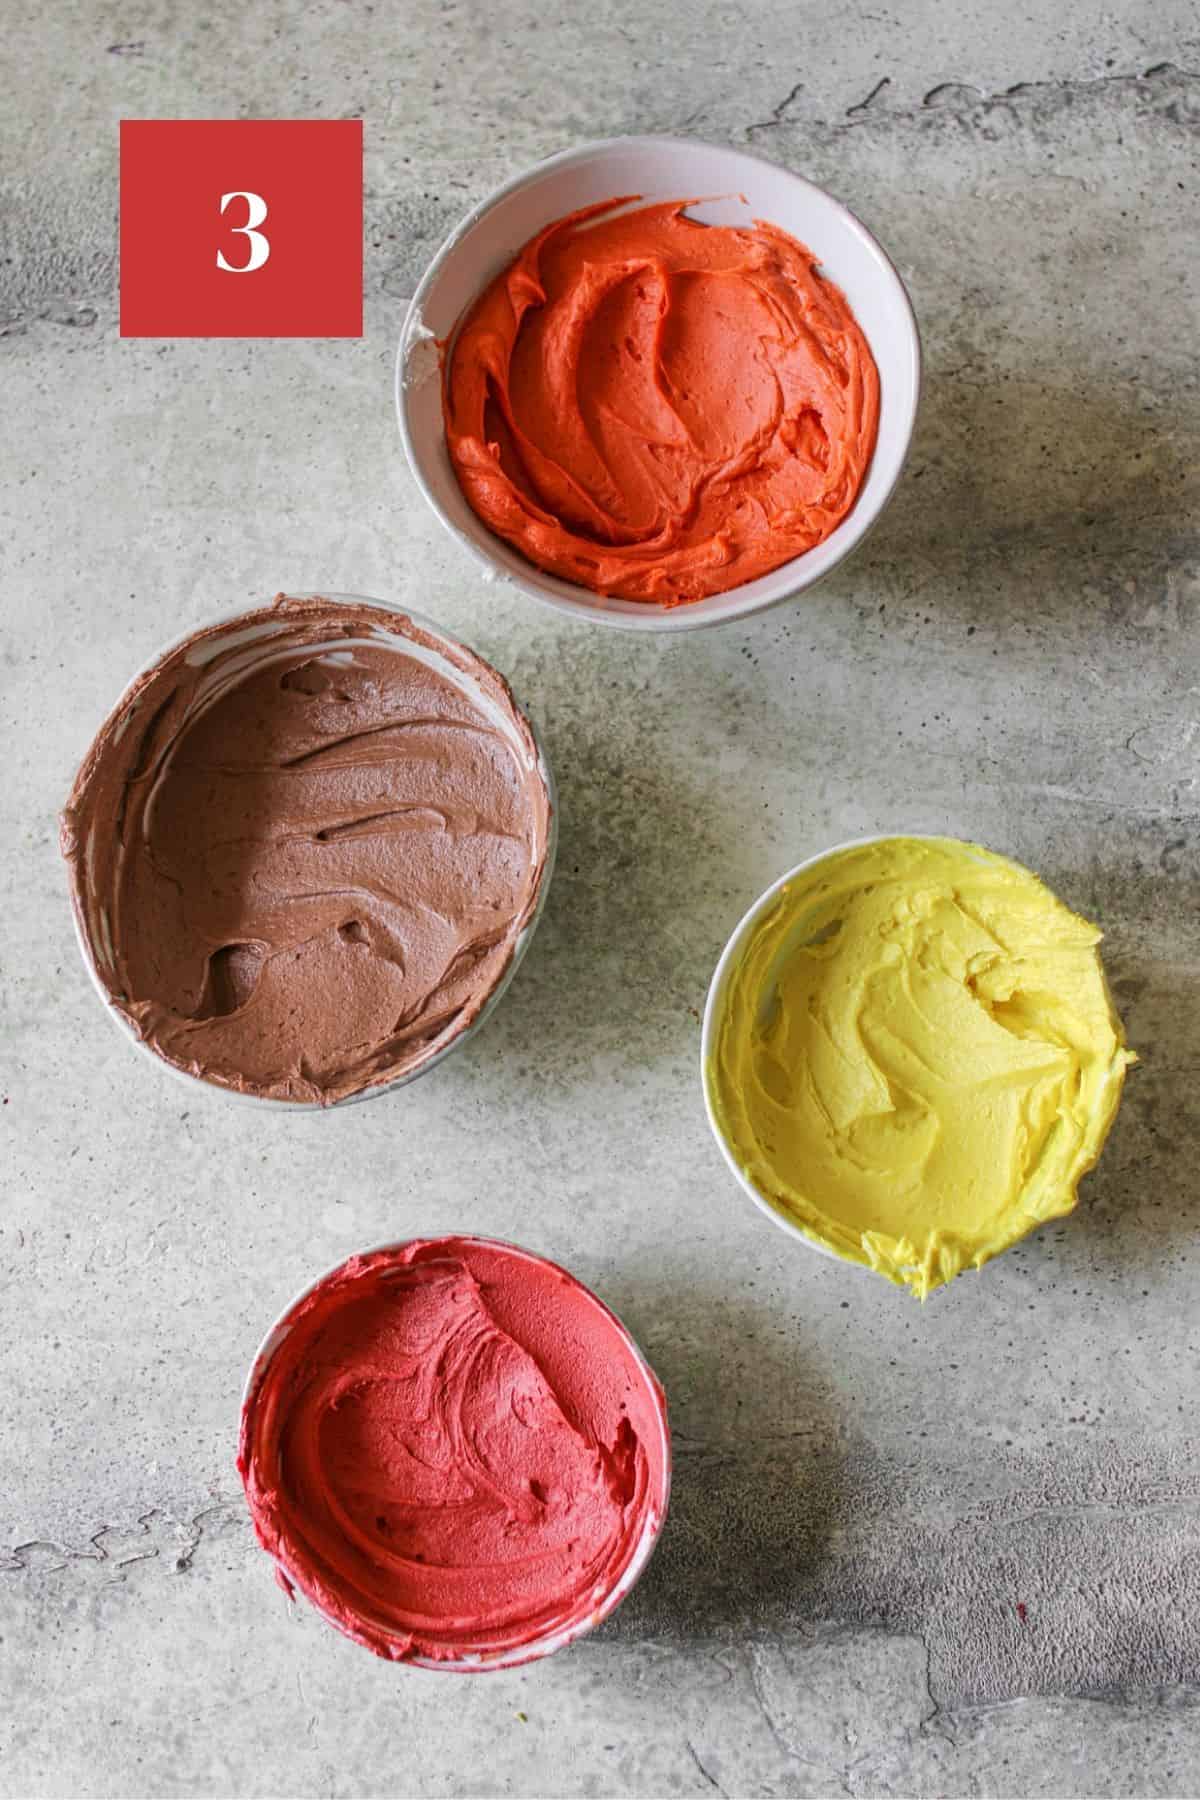 Brown, orange, red and yellow buttercream in separate bowls on a stone background. In the upper left corner is a dark red square with a white '3' in the center.